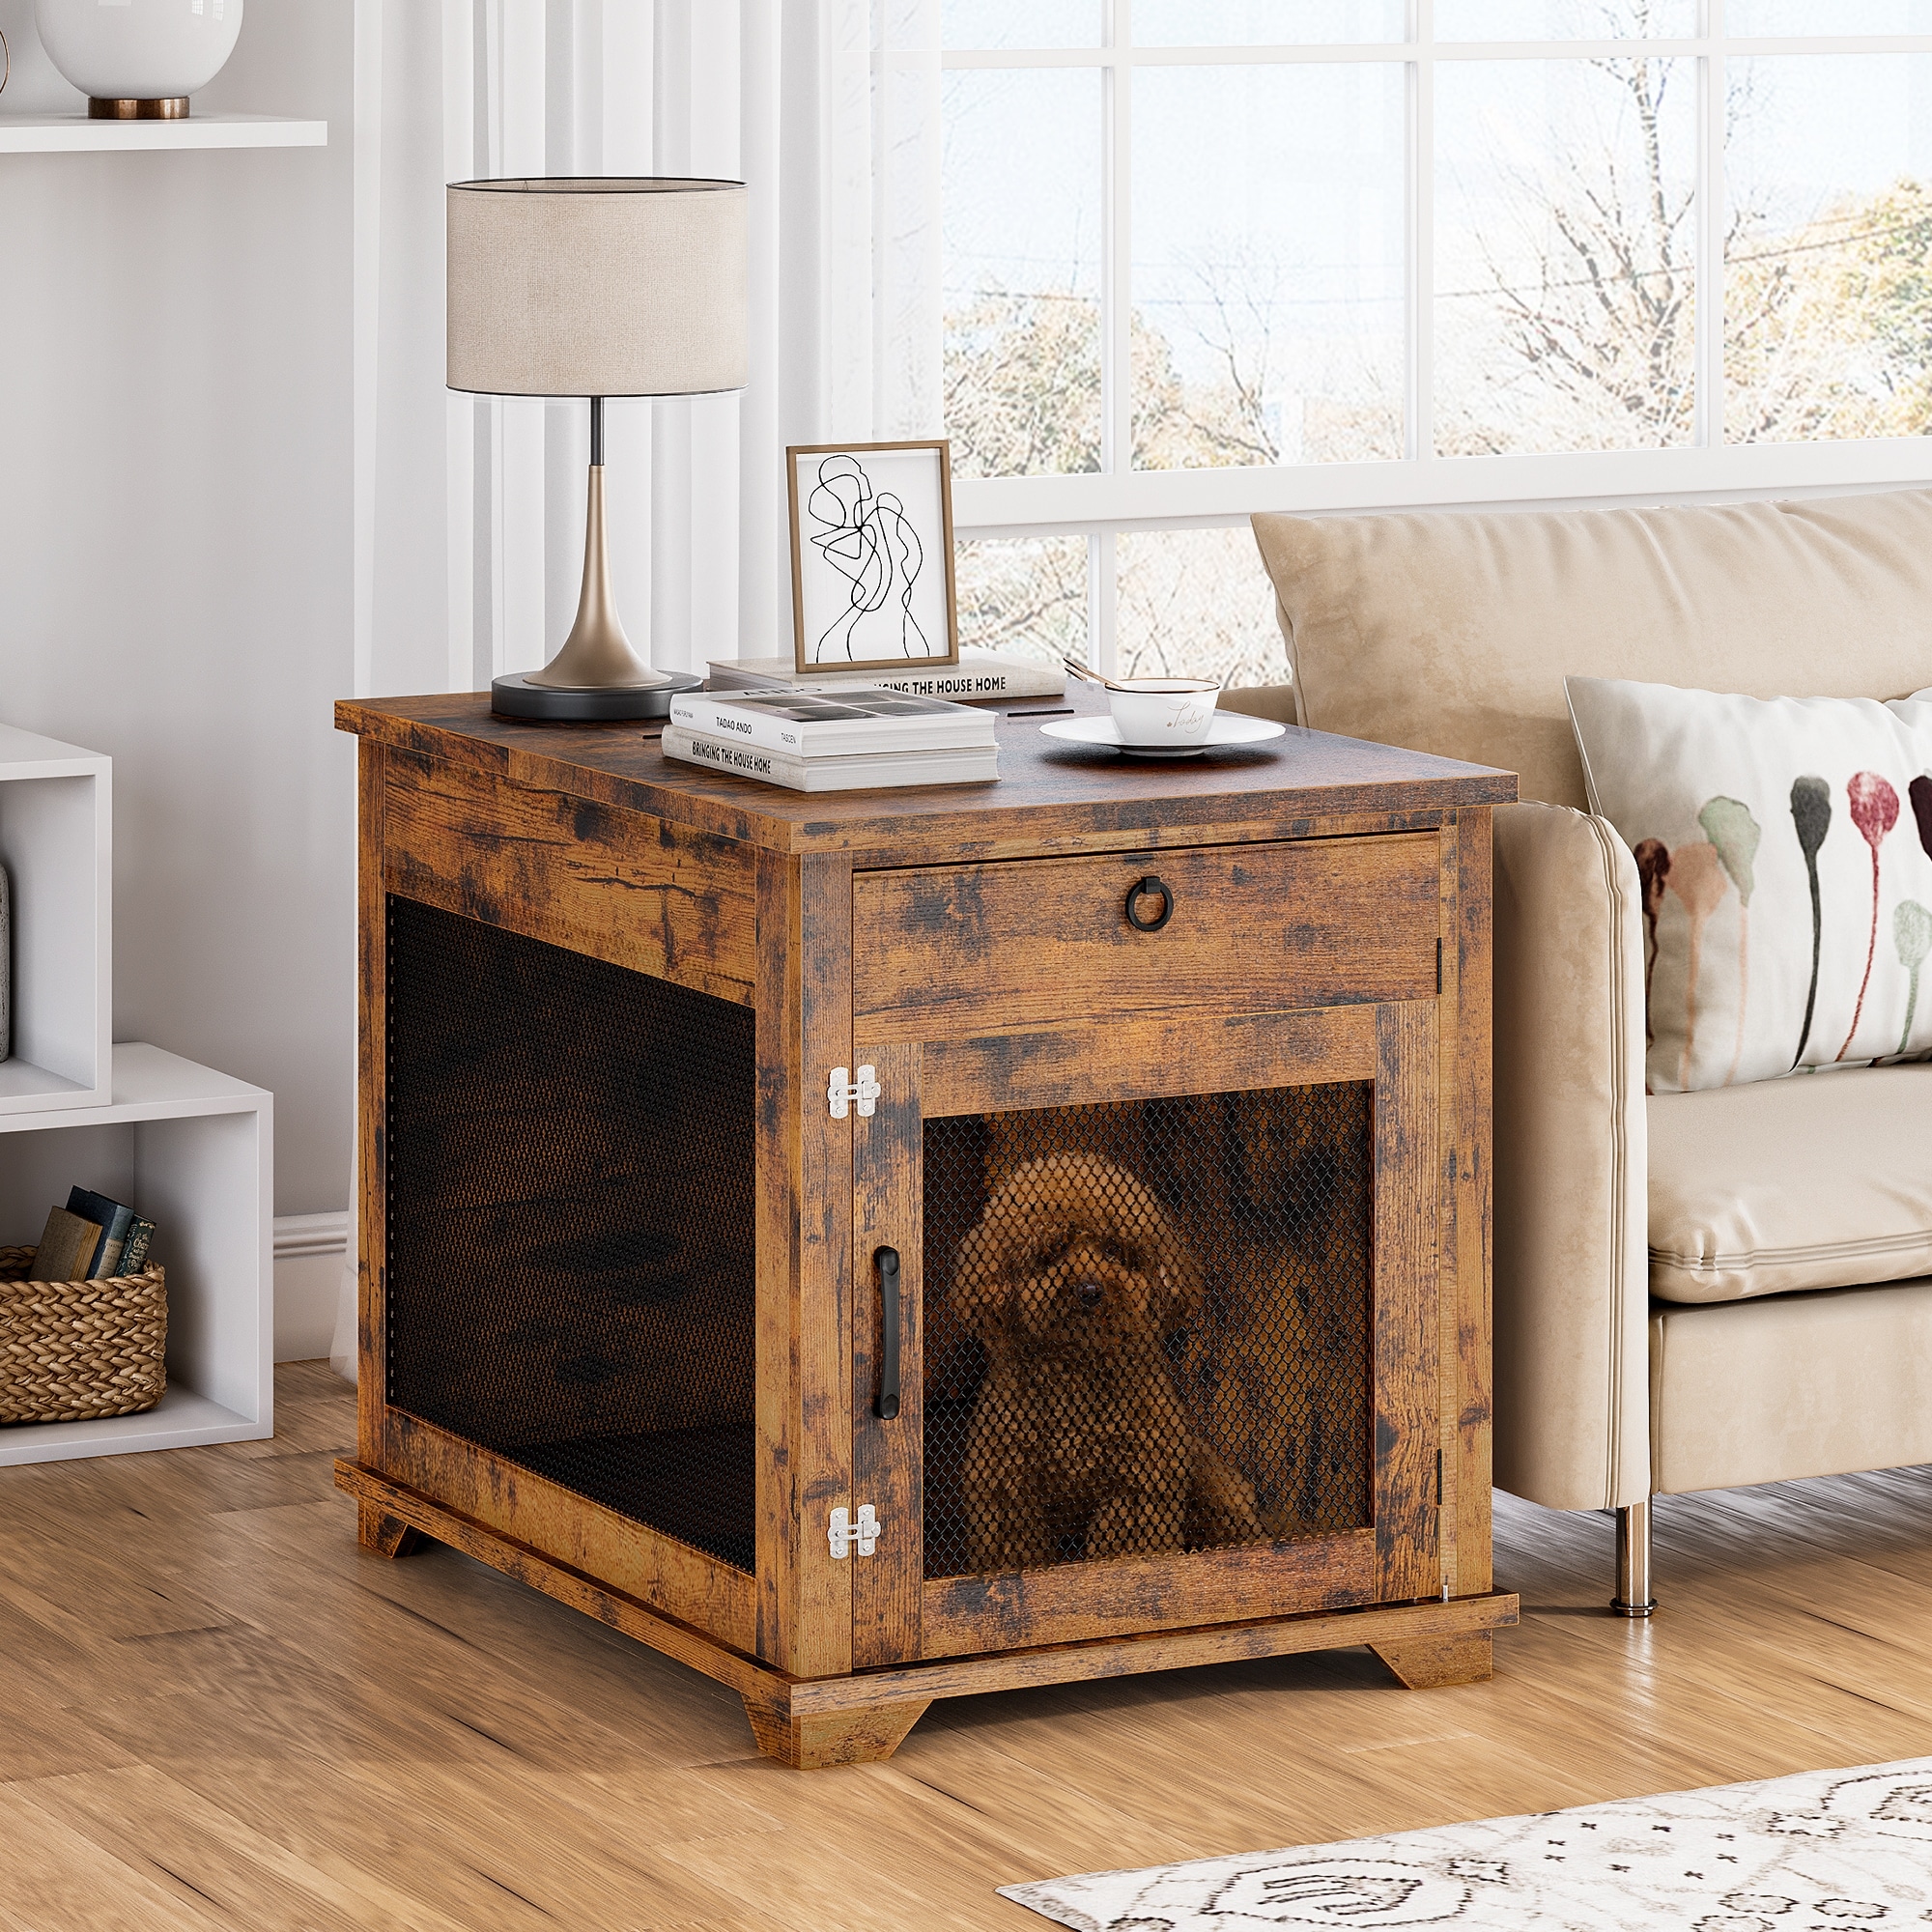 Wooden Dog Crate Furniture 39.4 Heavy Duty Dog Kennel with 2 Drawers End  Table